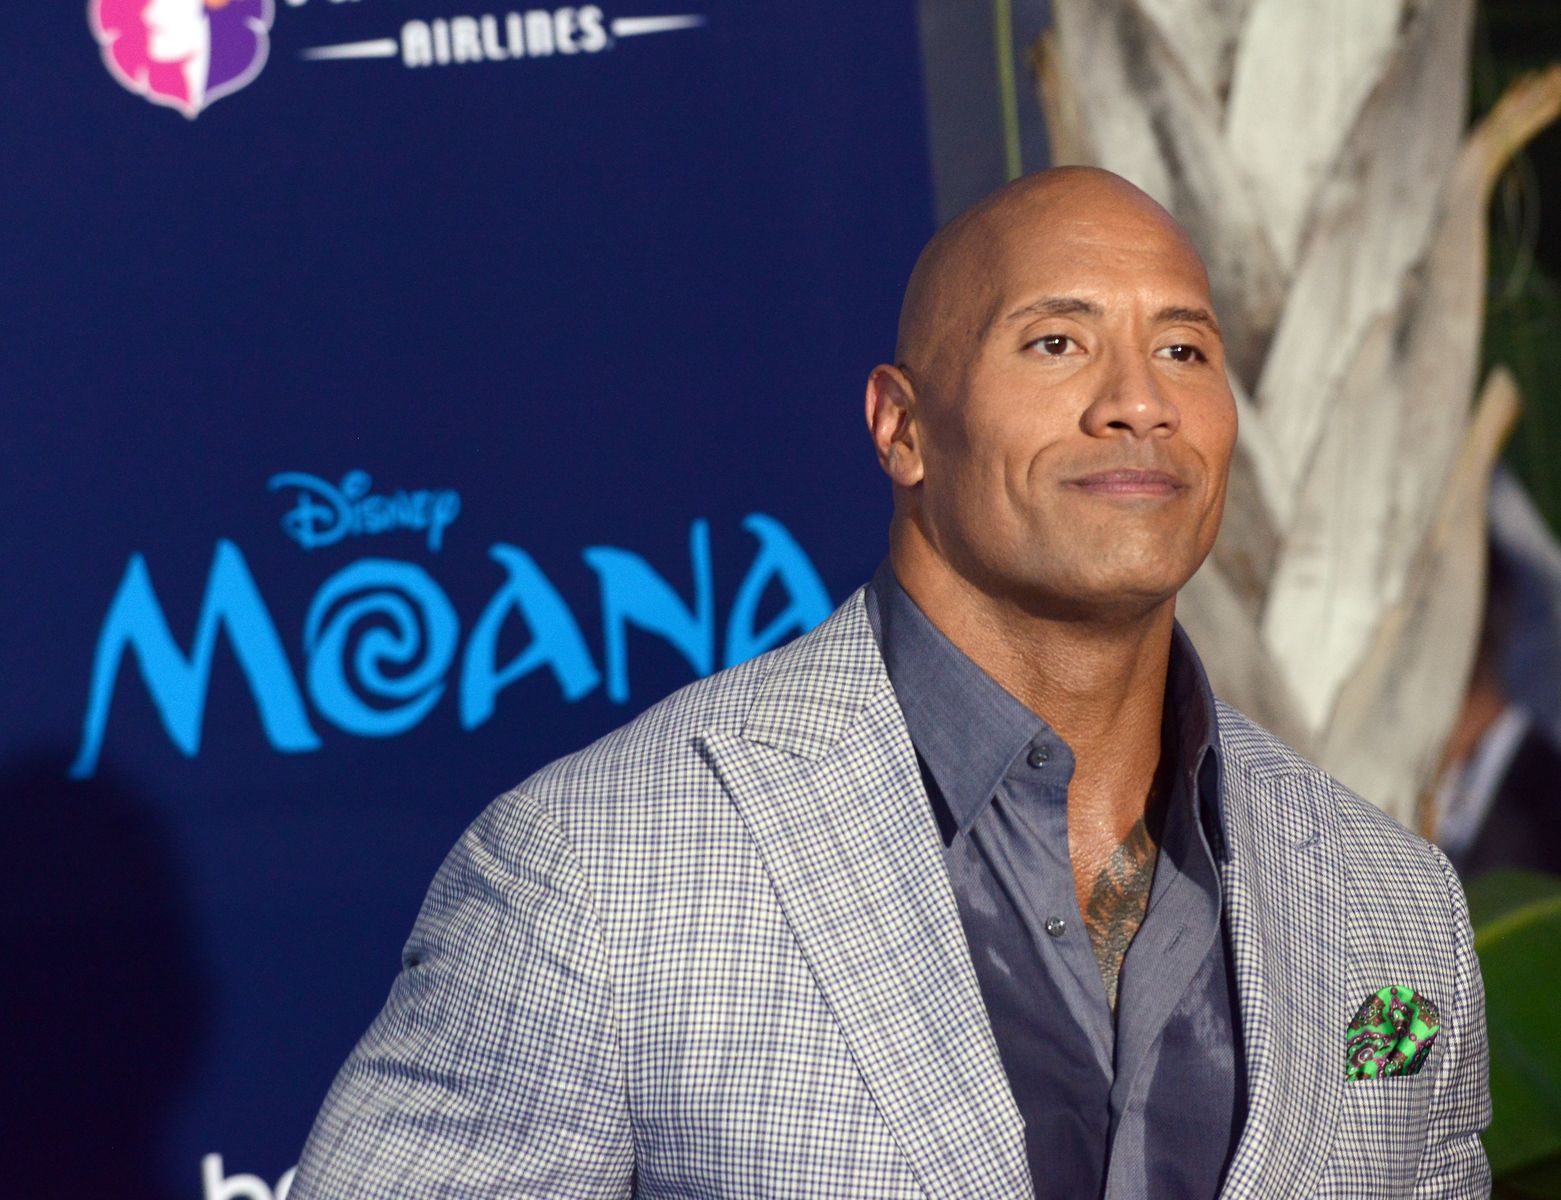 Dwayne Johnson at the premiere of Disney's "Moana" in 2016 in Hollywood | Source: Getty Images